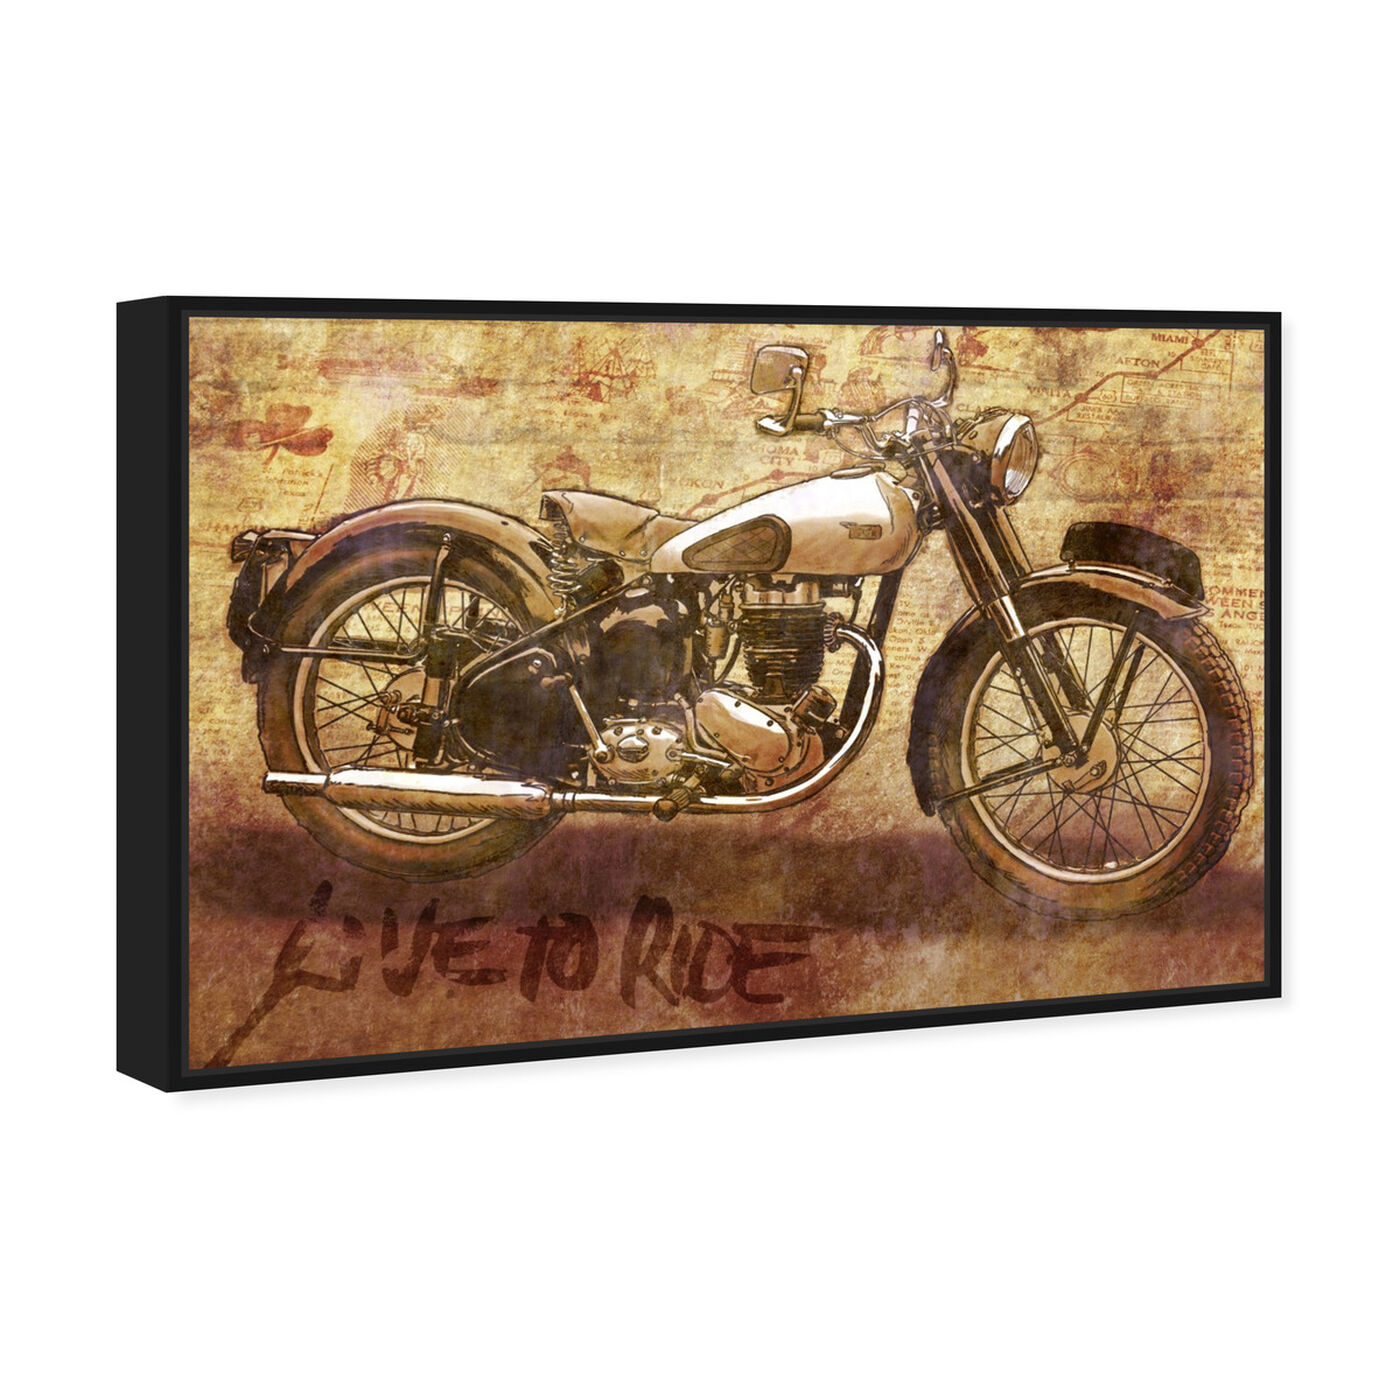 Angled view of Live to Ride featuring transportation and motorcycles art.